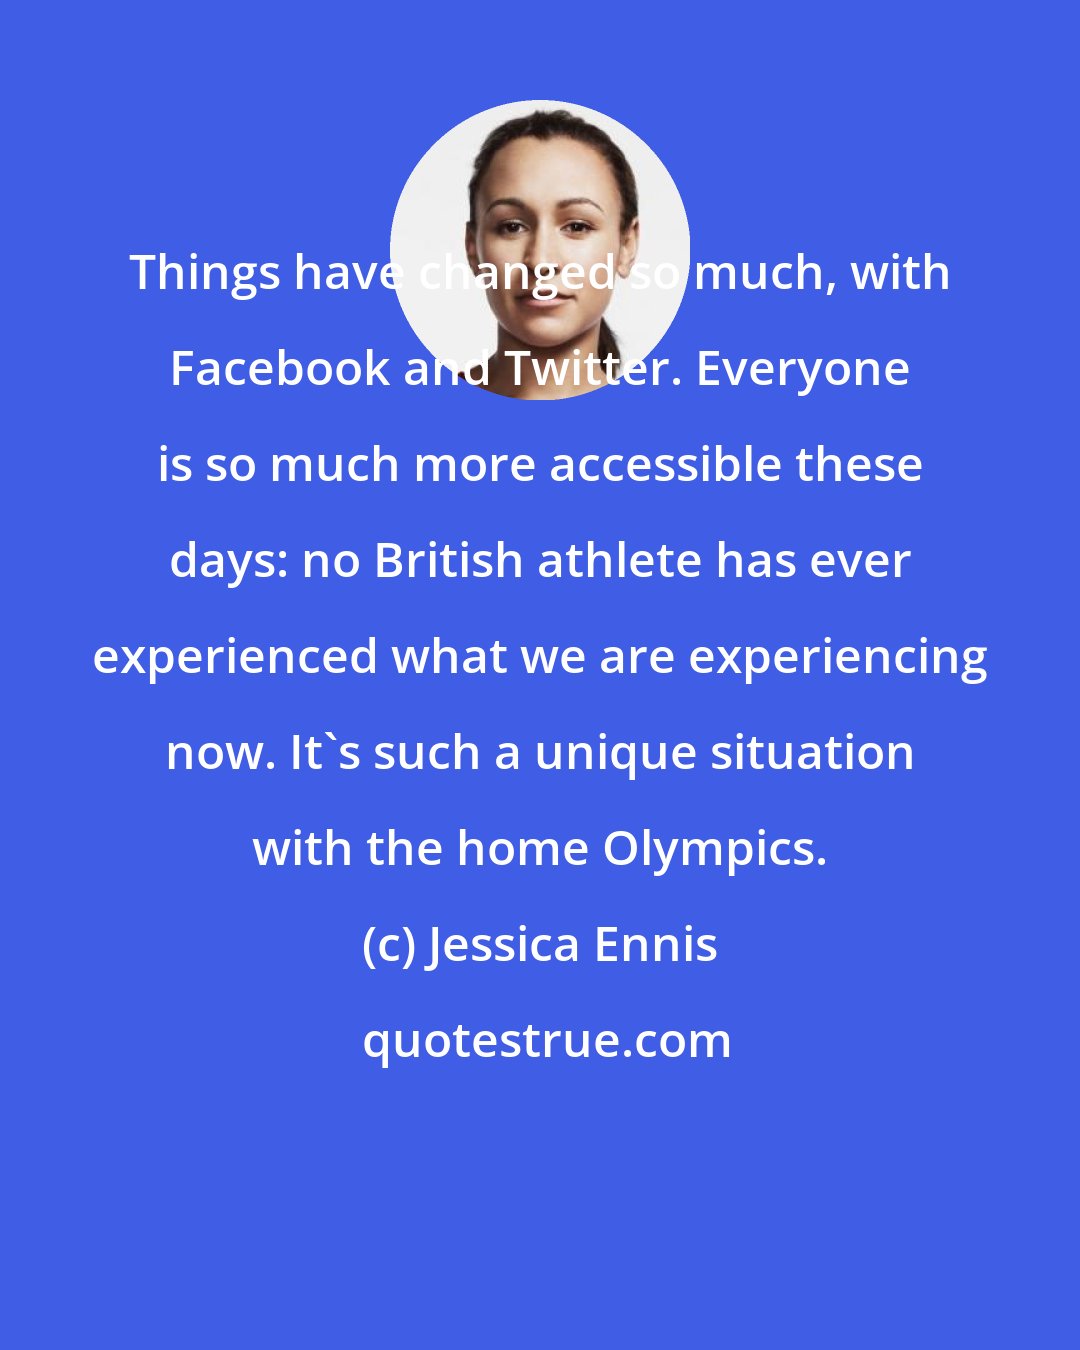 Jessica Ennis: Things have changed so much, with Facebook and Twitter. Everyone is so much more accessible these days: no British athlete has ever experienced what we are experiencing now. It's such a unique situation with the home Olympics.